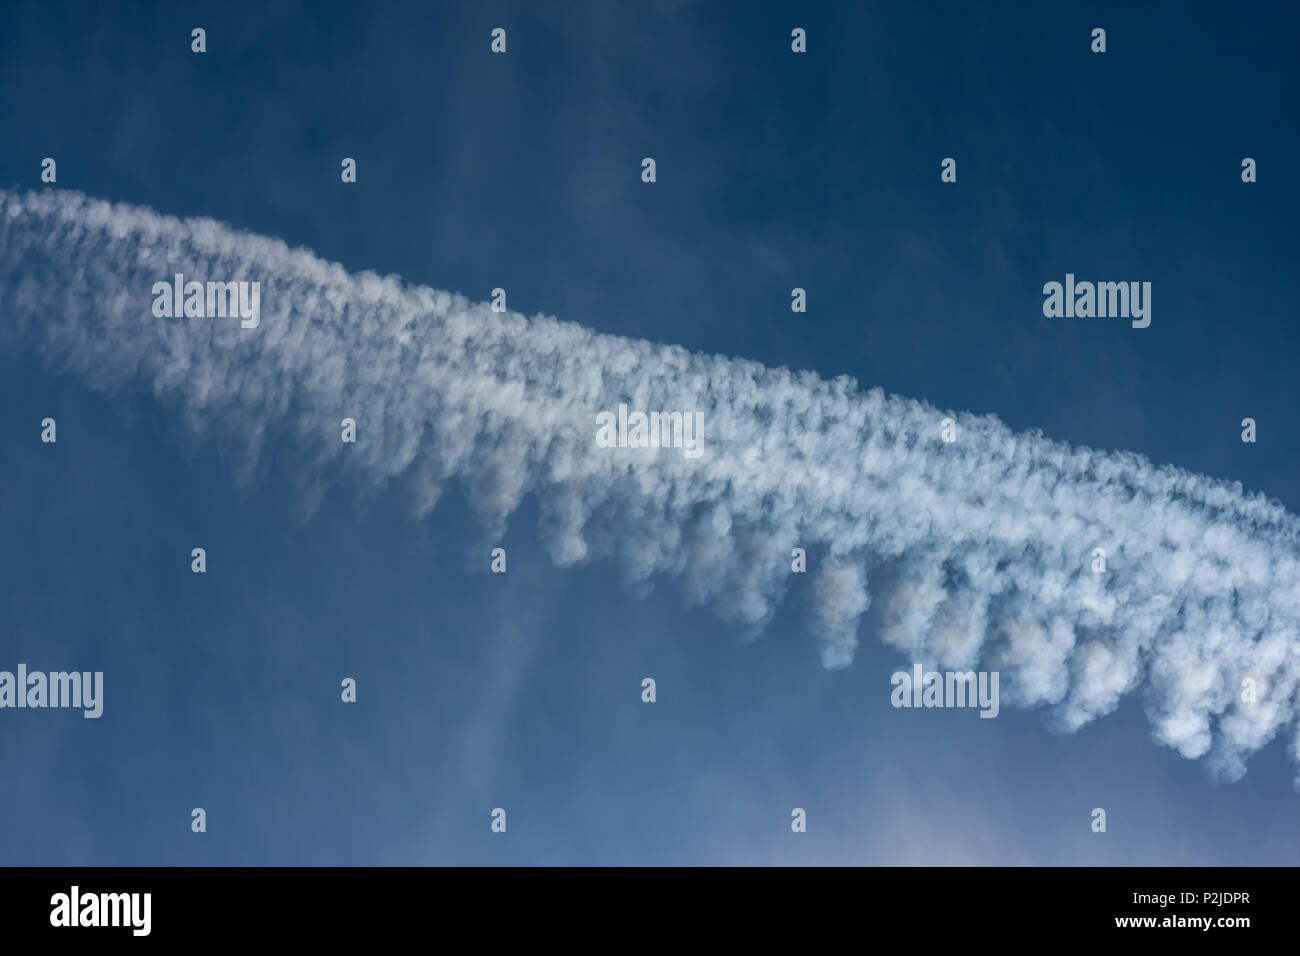 Environmental pollution by airplanes - chemtrails or contrails Stock Photo